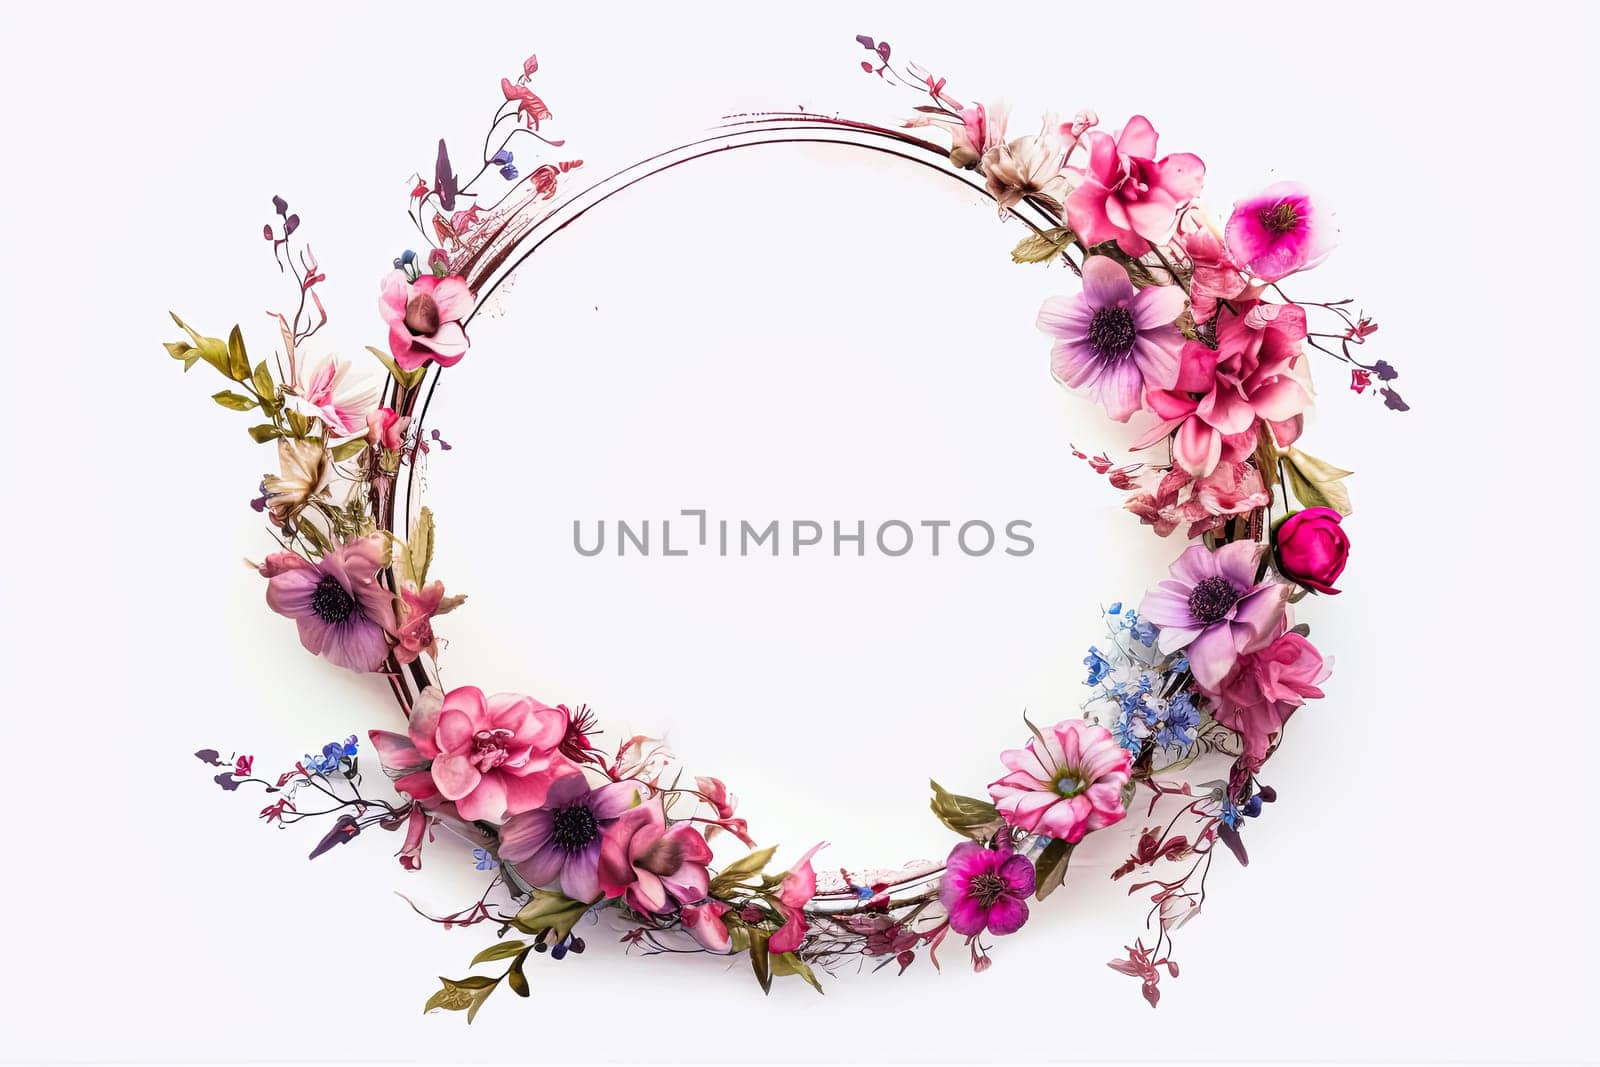 A flower arrangement with pink and white flowers. The flowers are arranged in a way that creates a sense of movement and flow. Scene is one of beauty and elegance